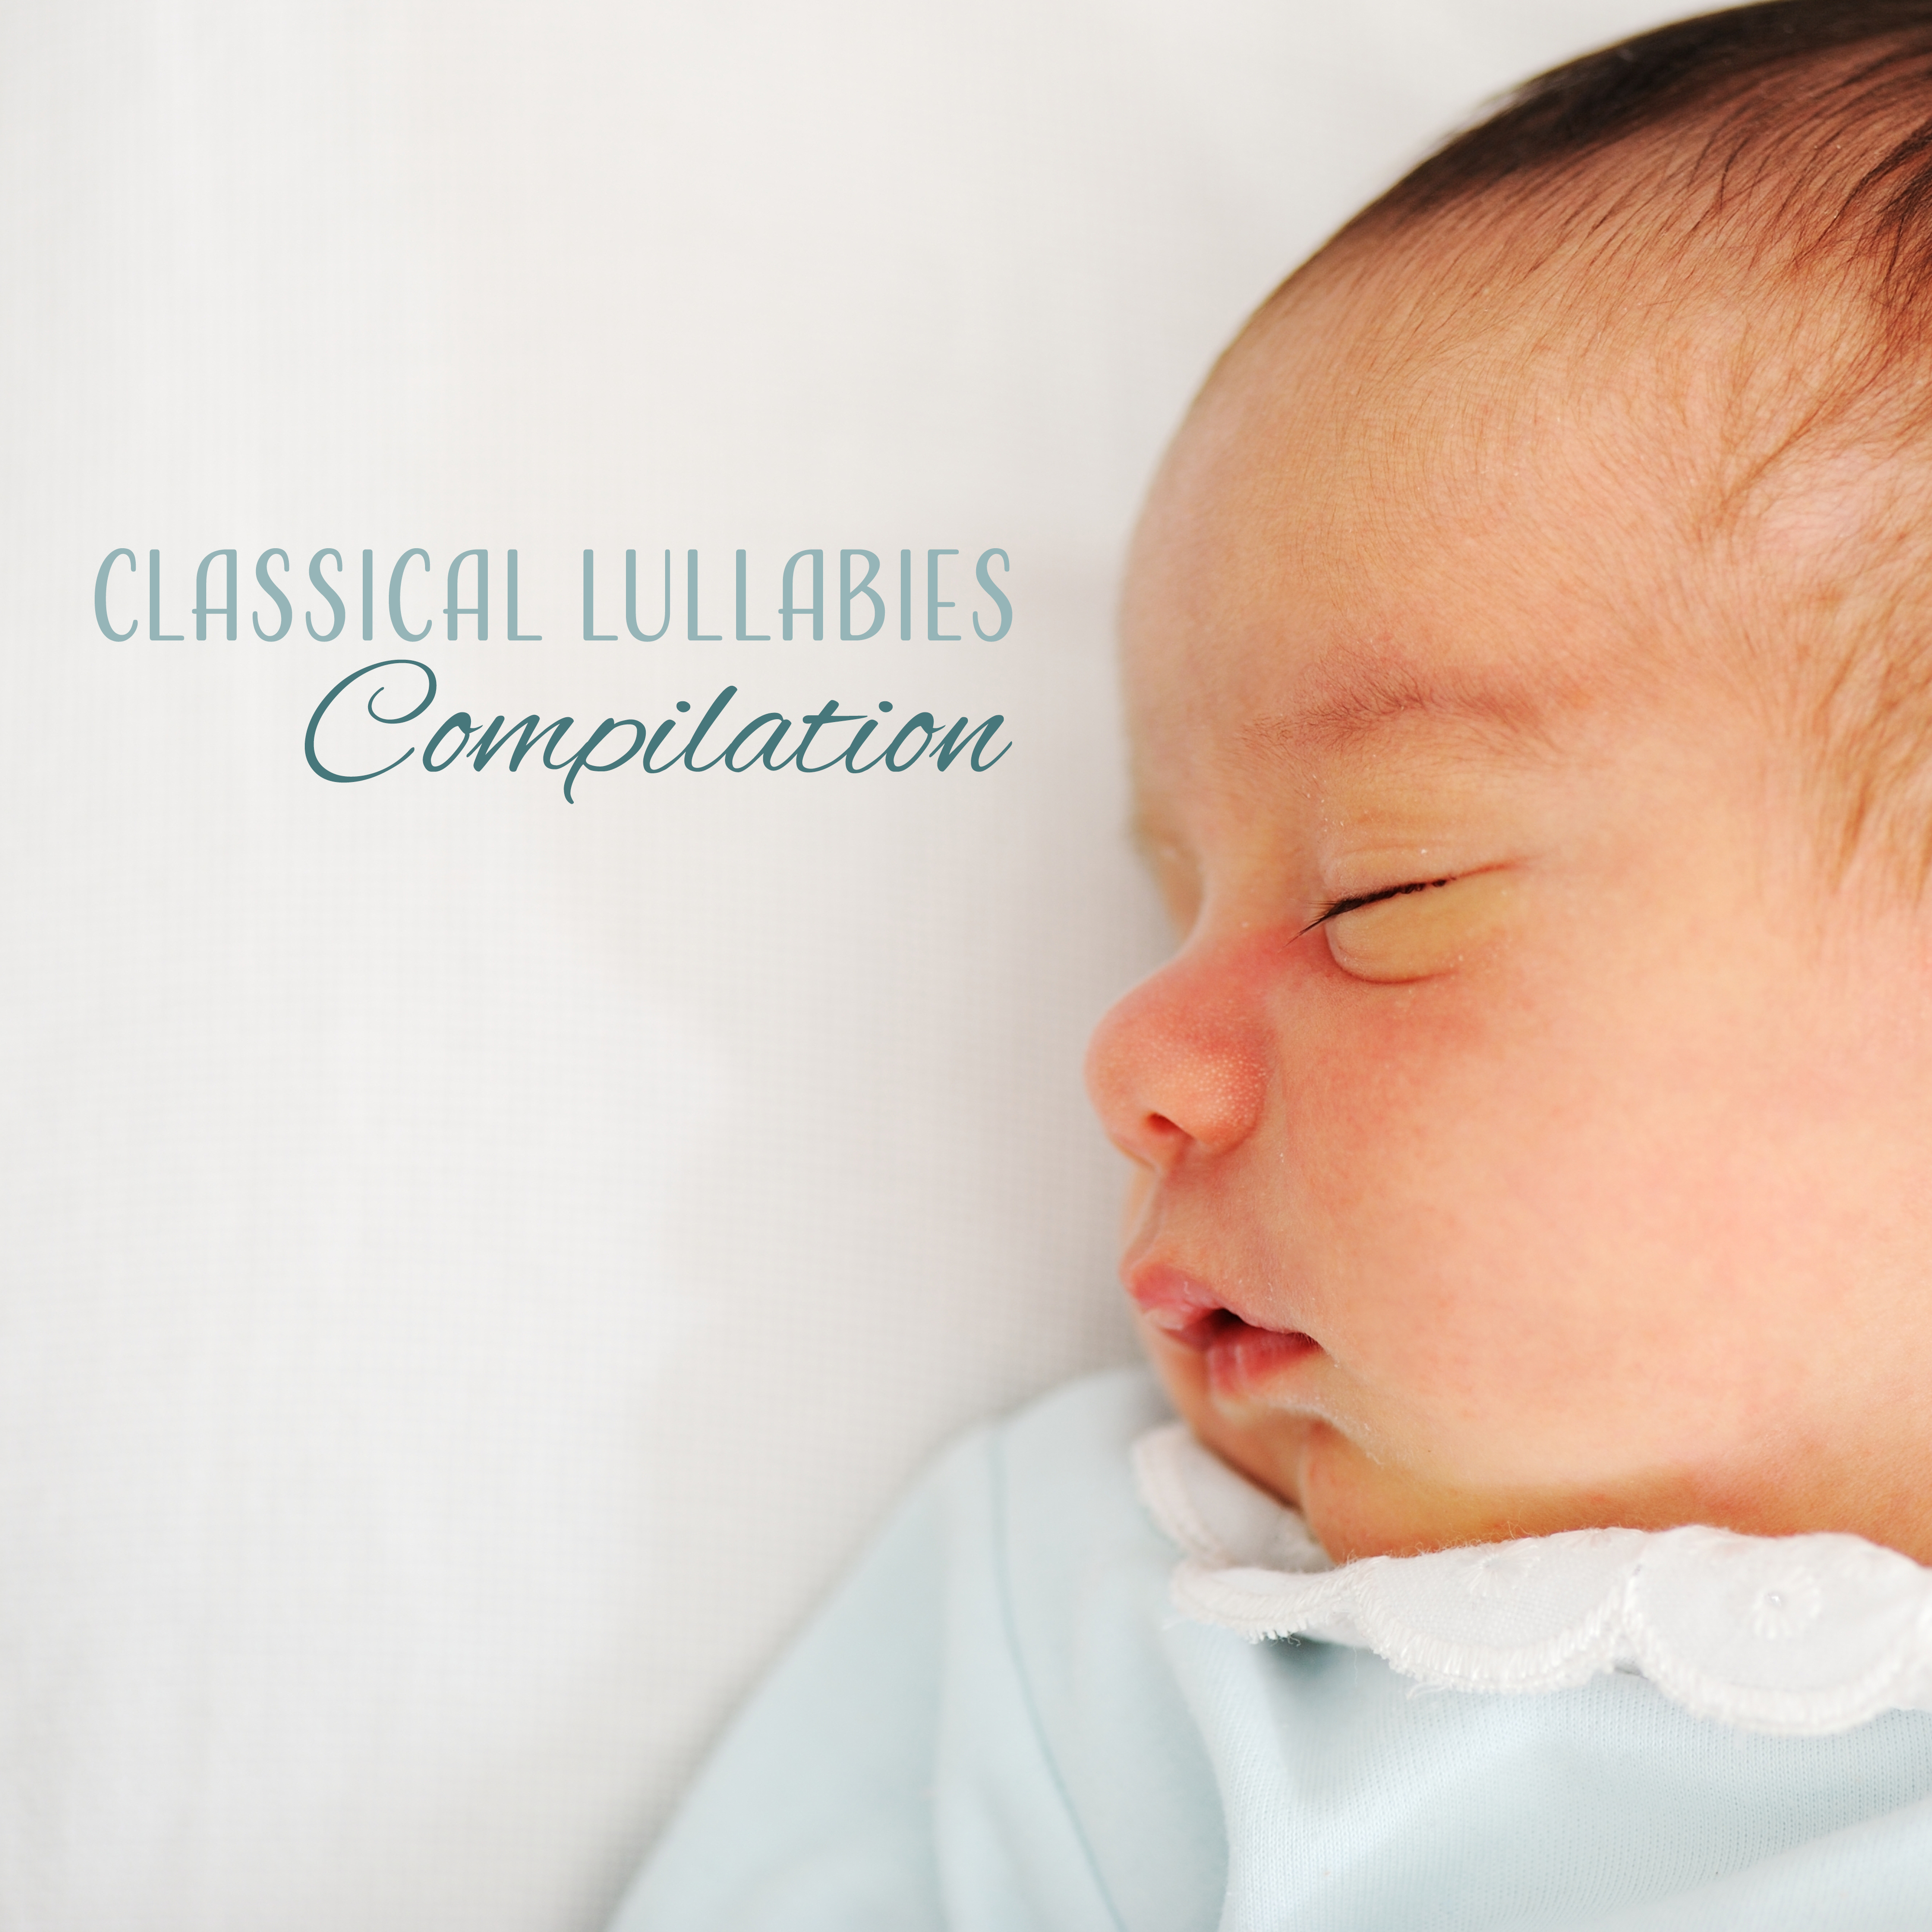 Classical Lullabies Compilation  Relaxing Songs for Babies, Classical Music, Lullabies, Sweet Dreams, Sleepless Nights